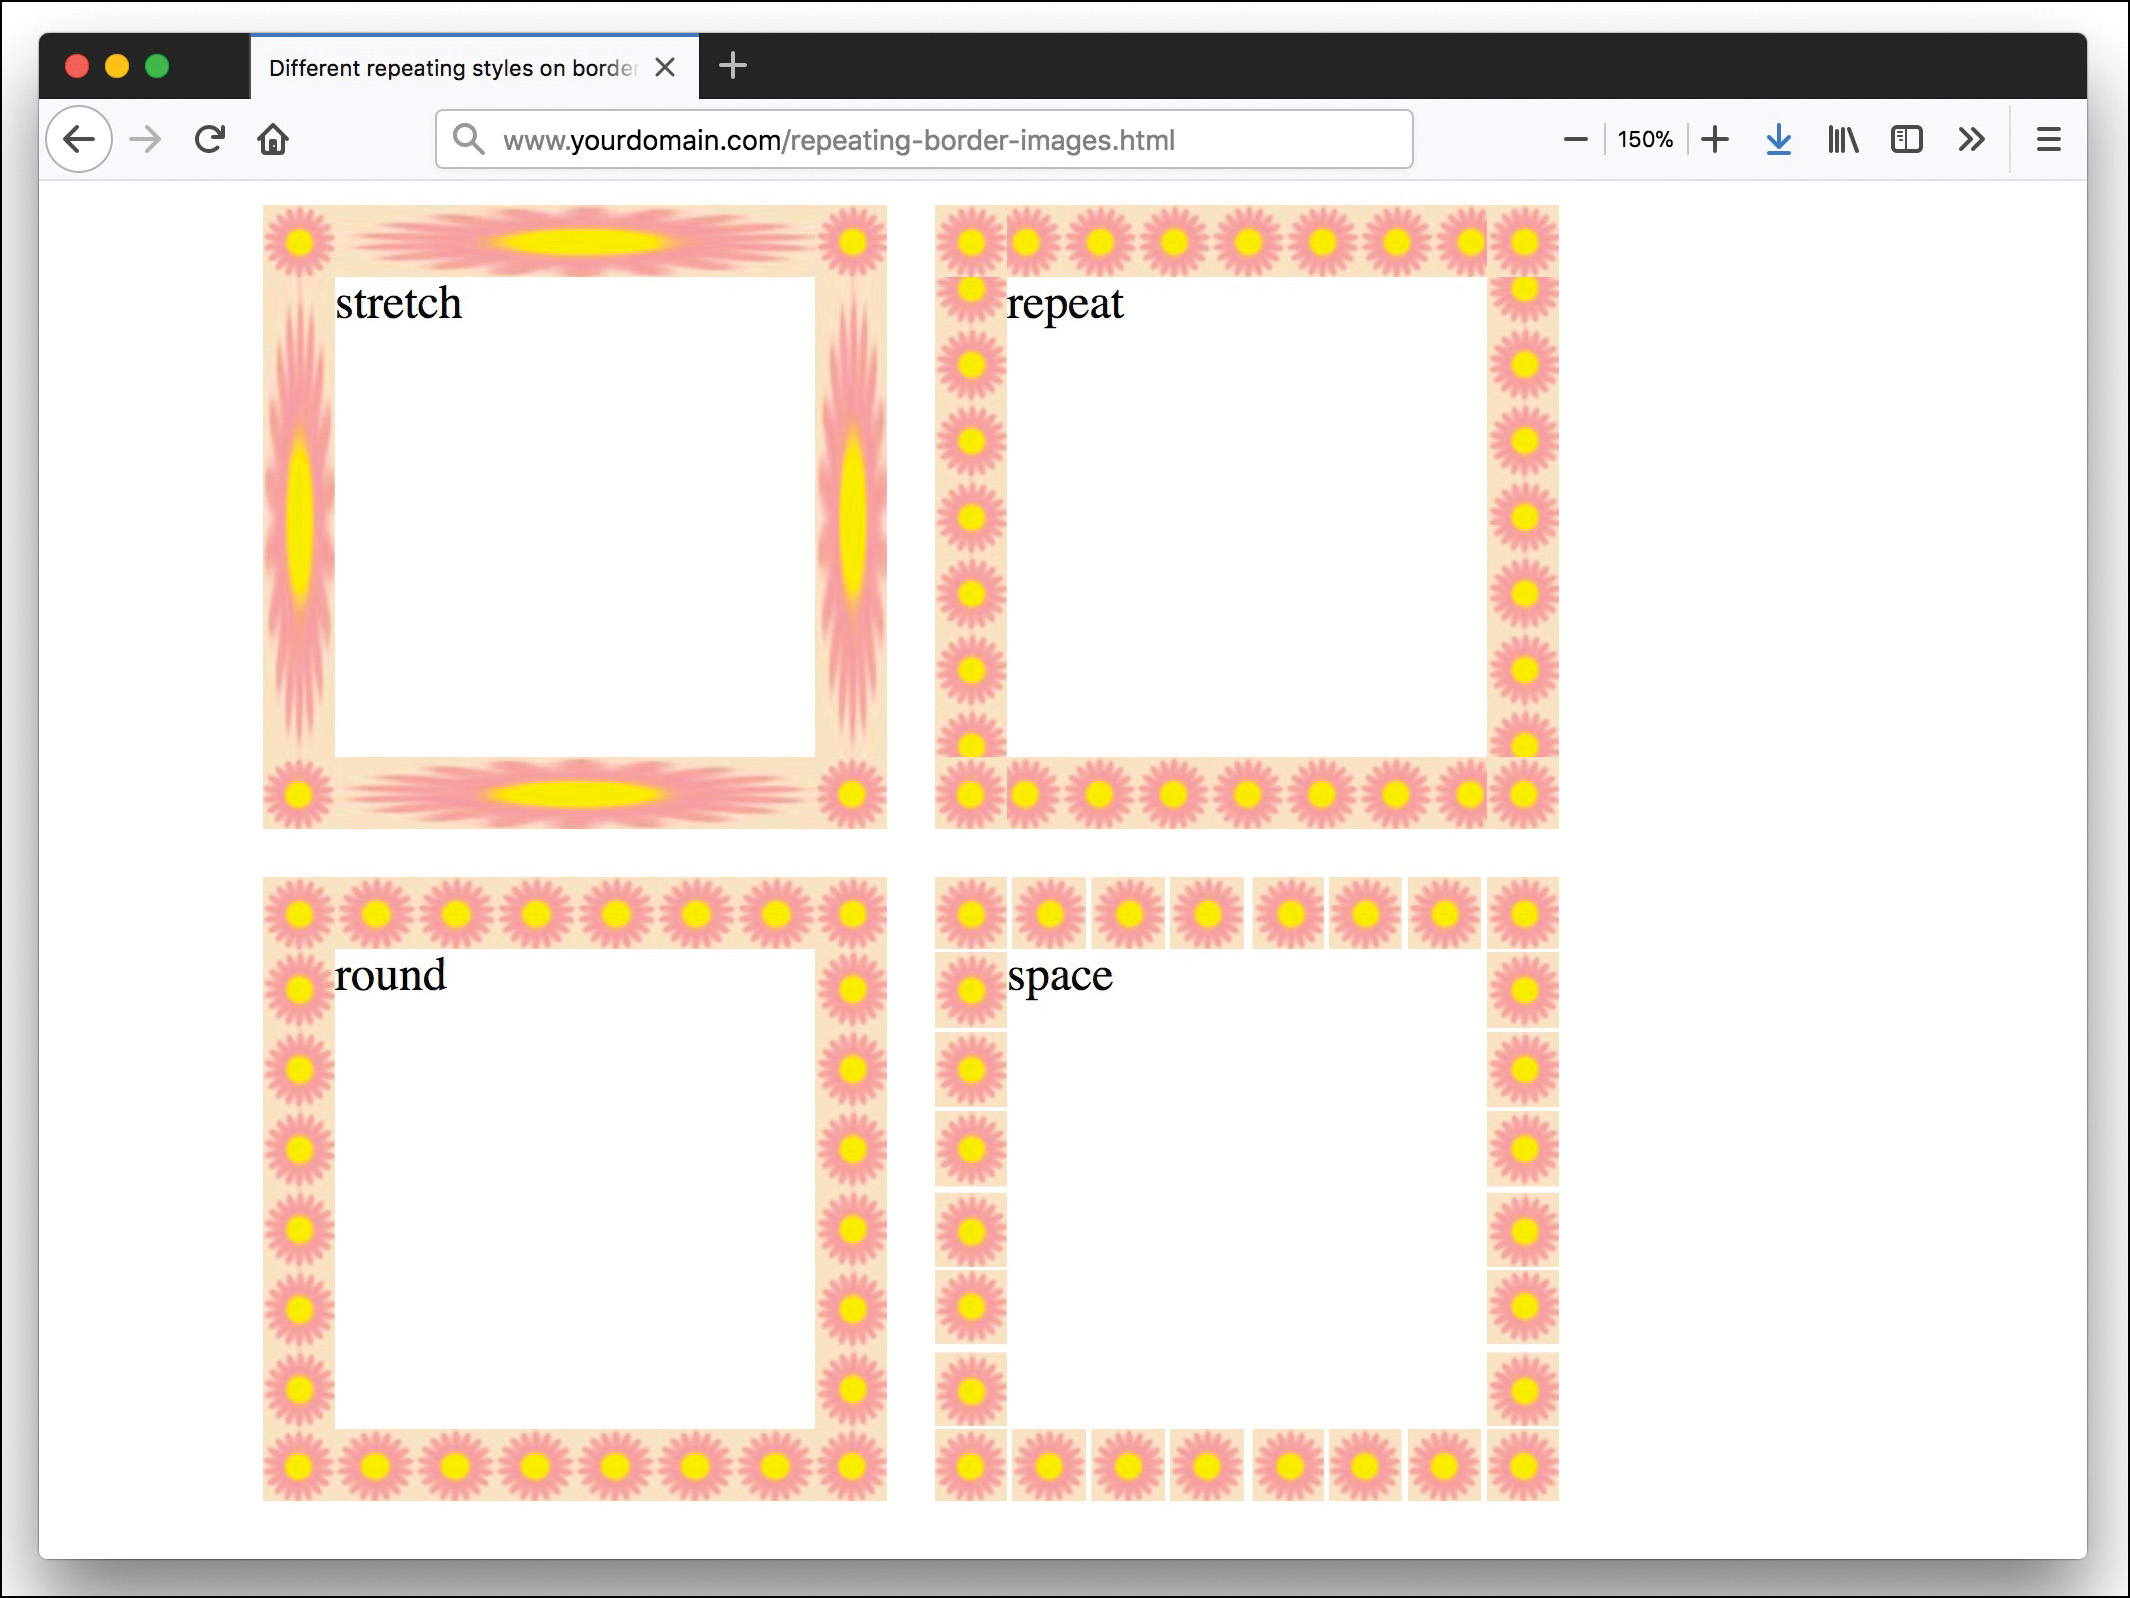 Previews of different repeating styles on a border image.